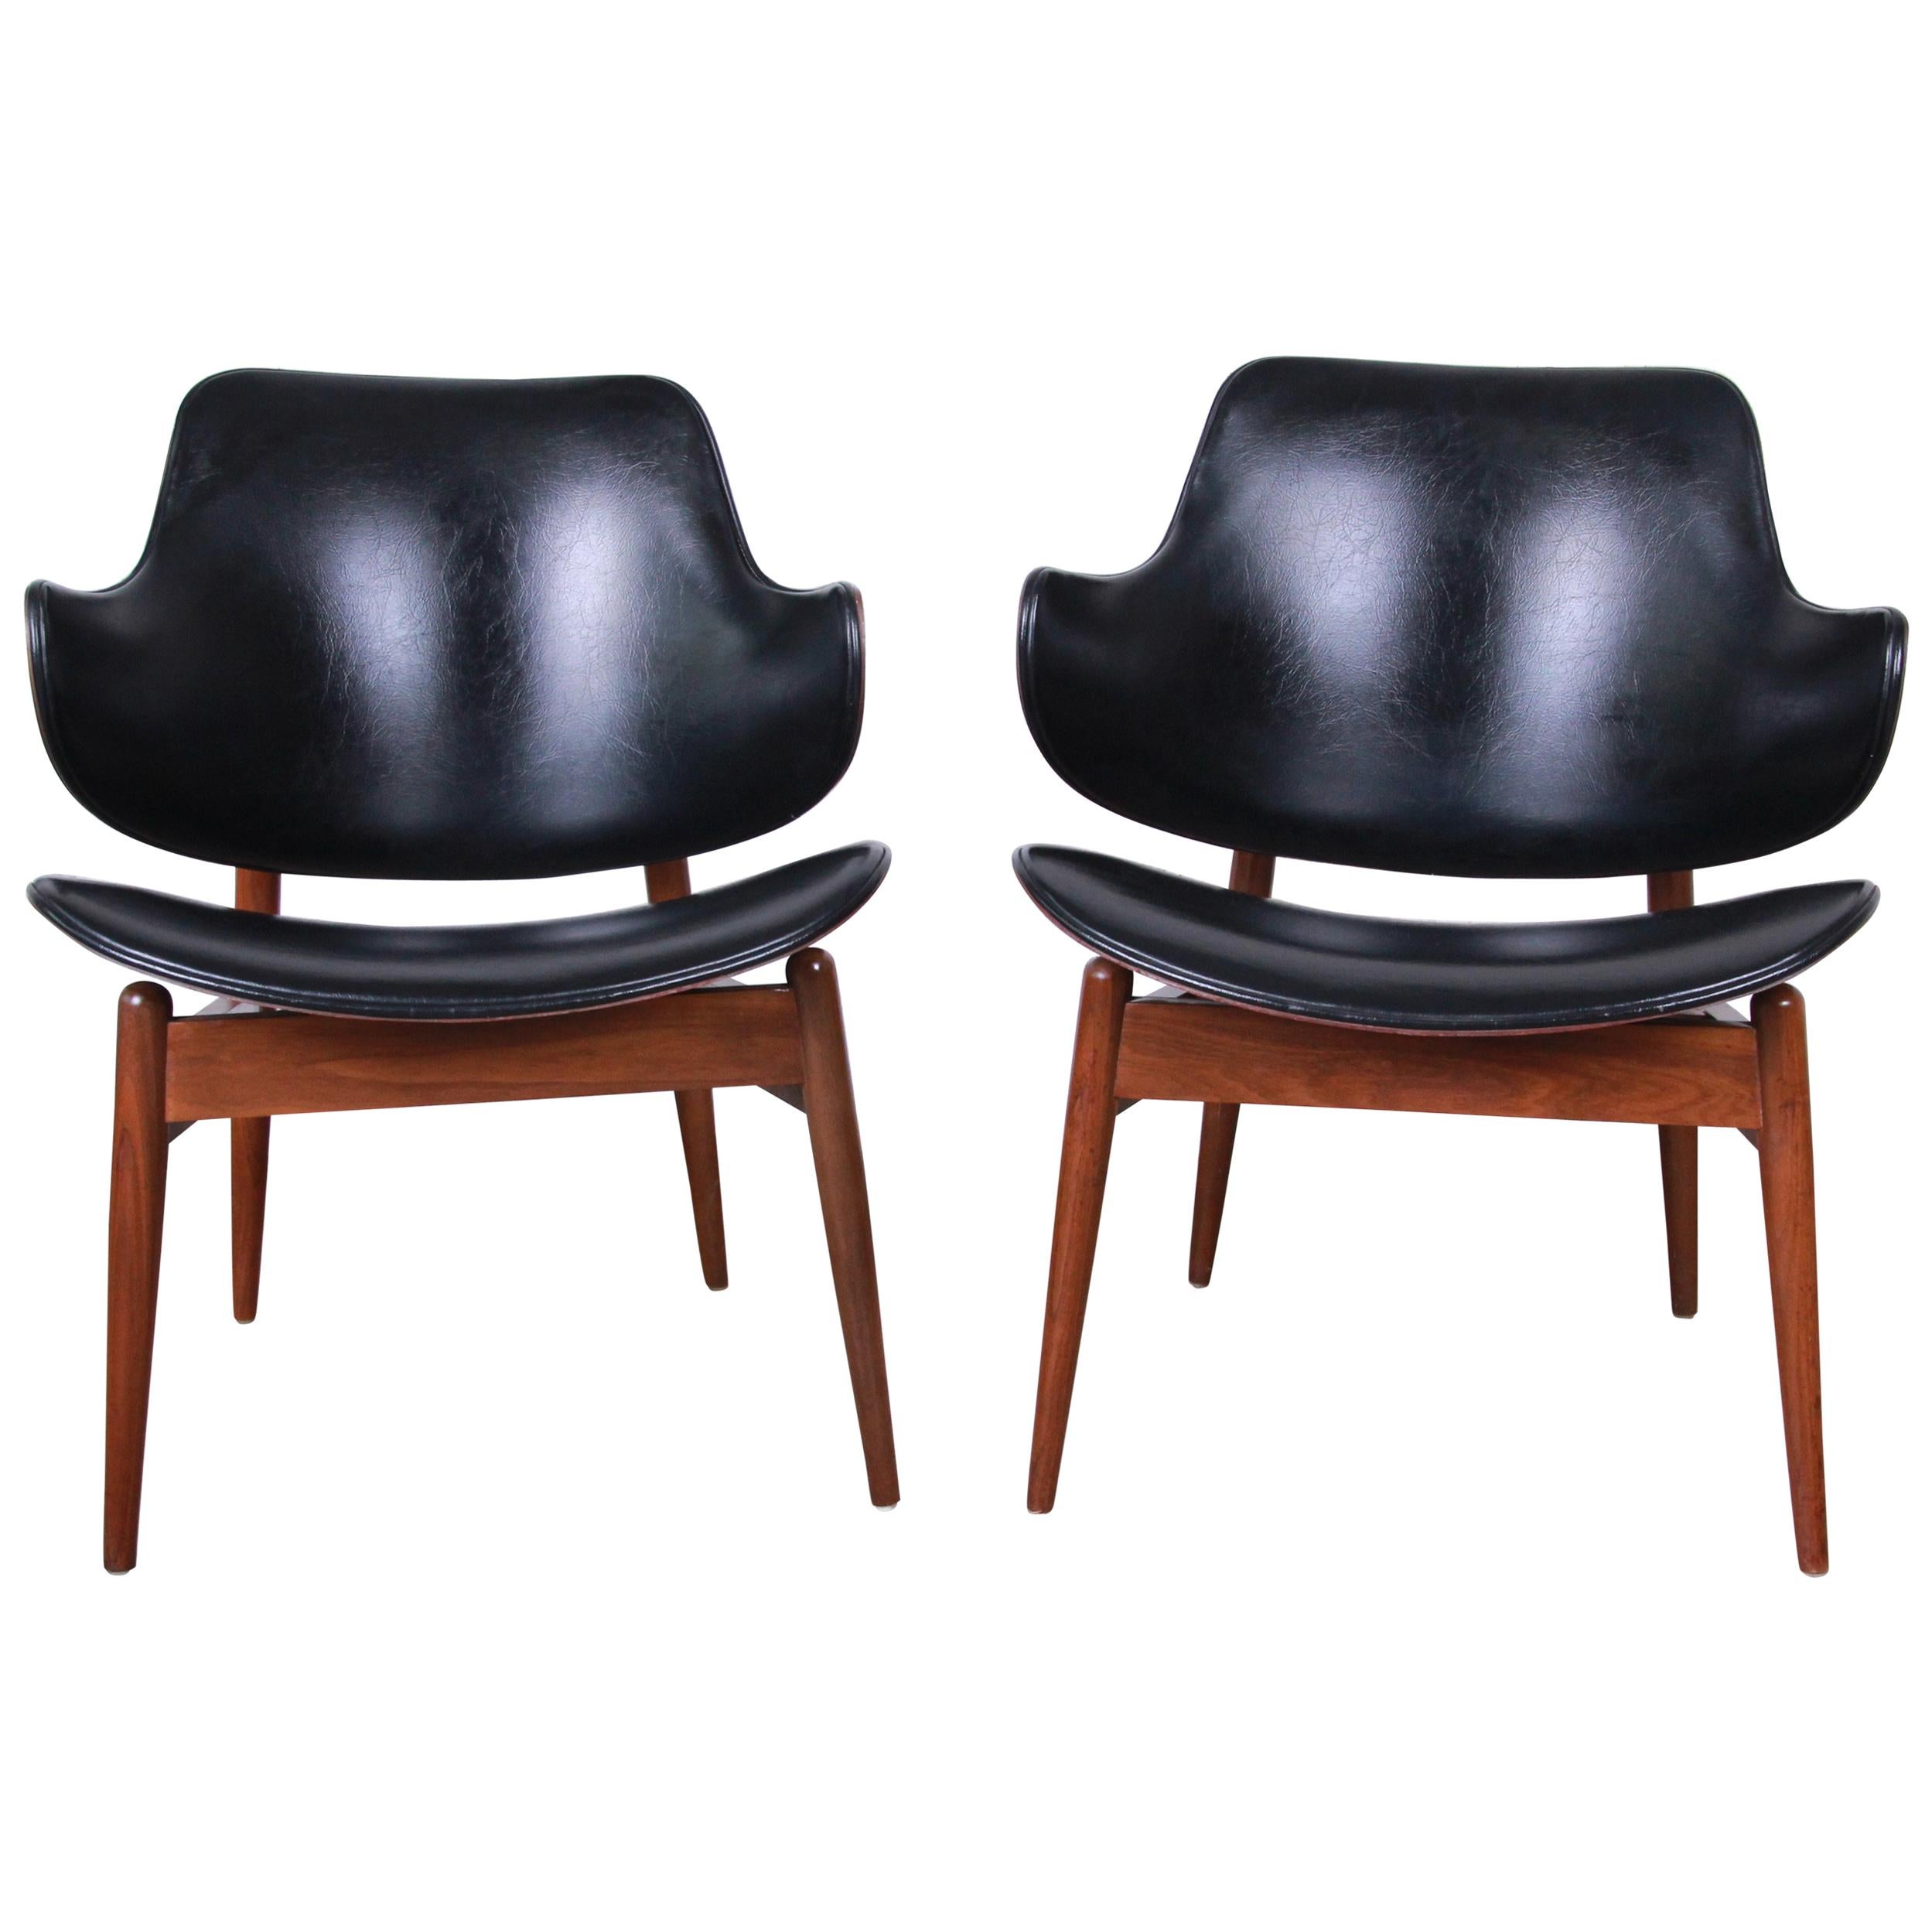 Mid-Century Modern Clam Shell Chairs by Seymour J. Wiener for Kodawood, 1960s